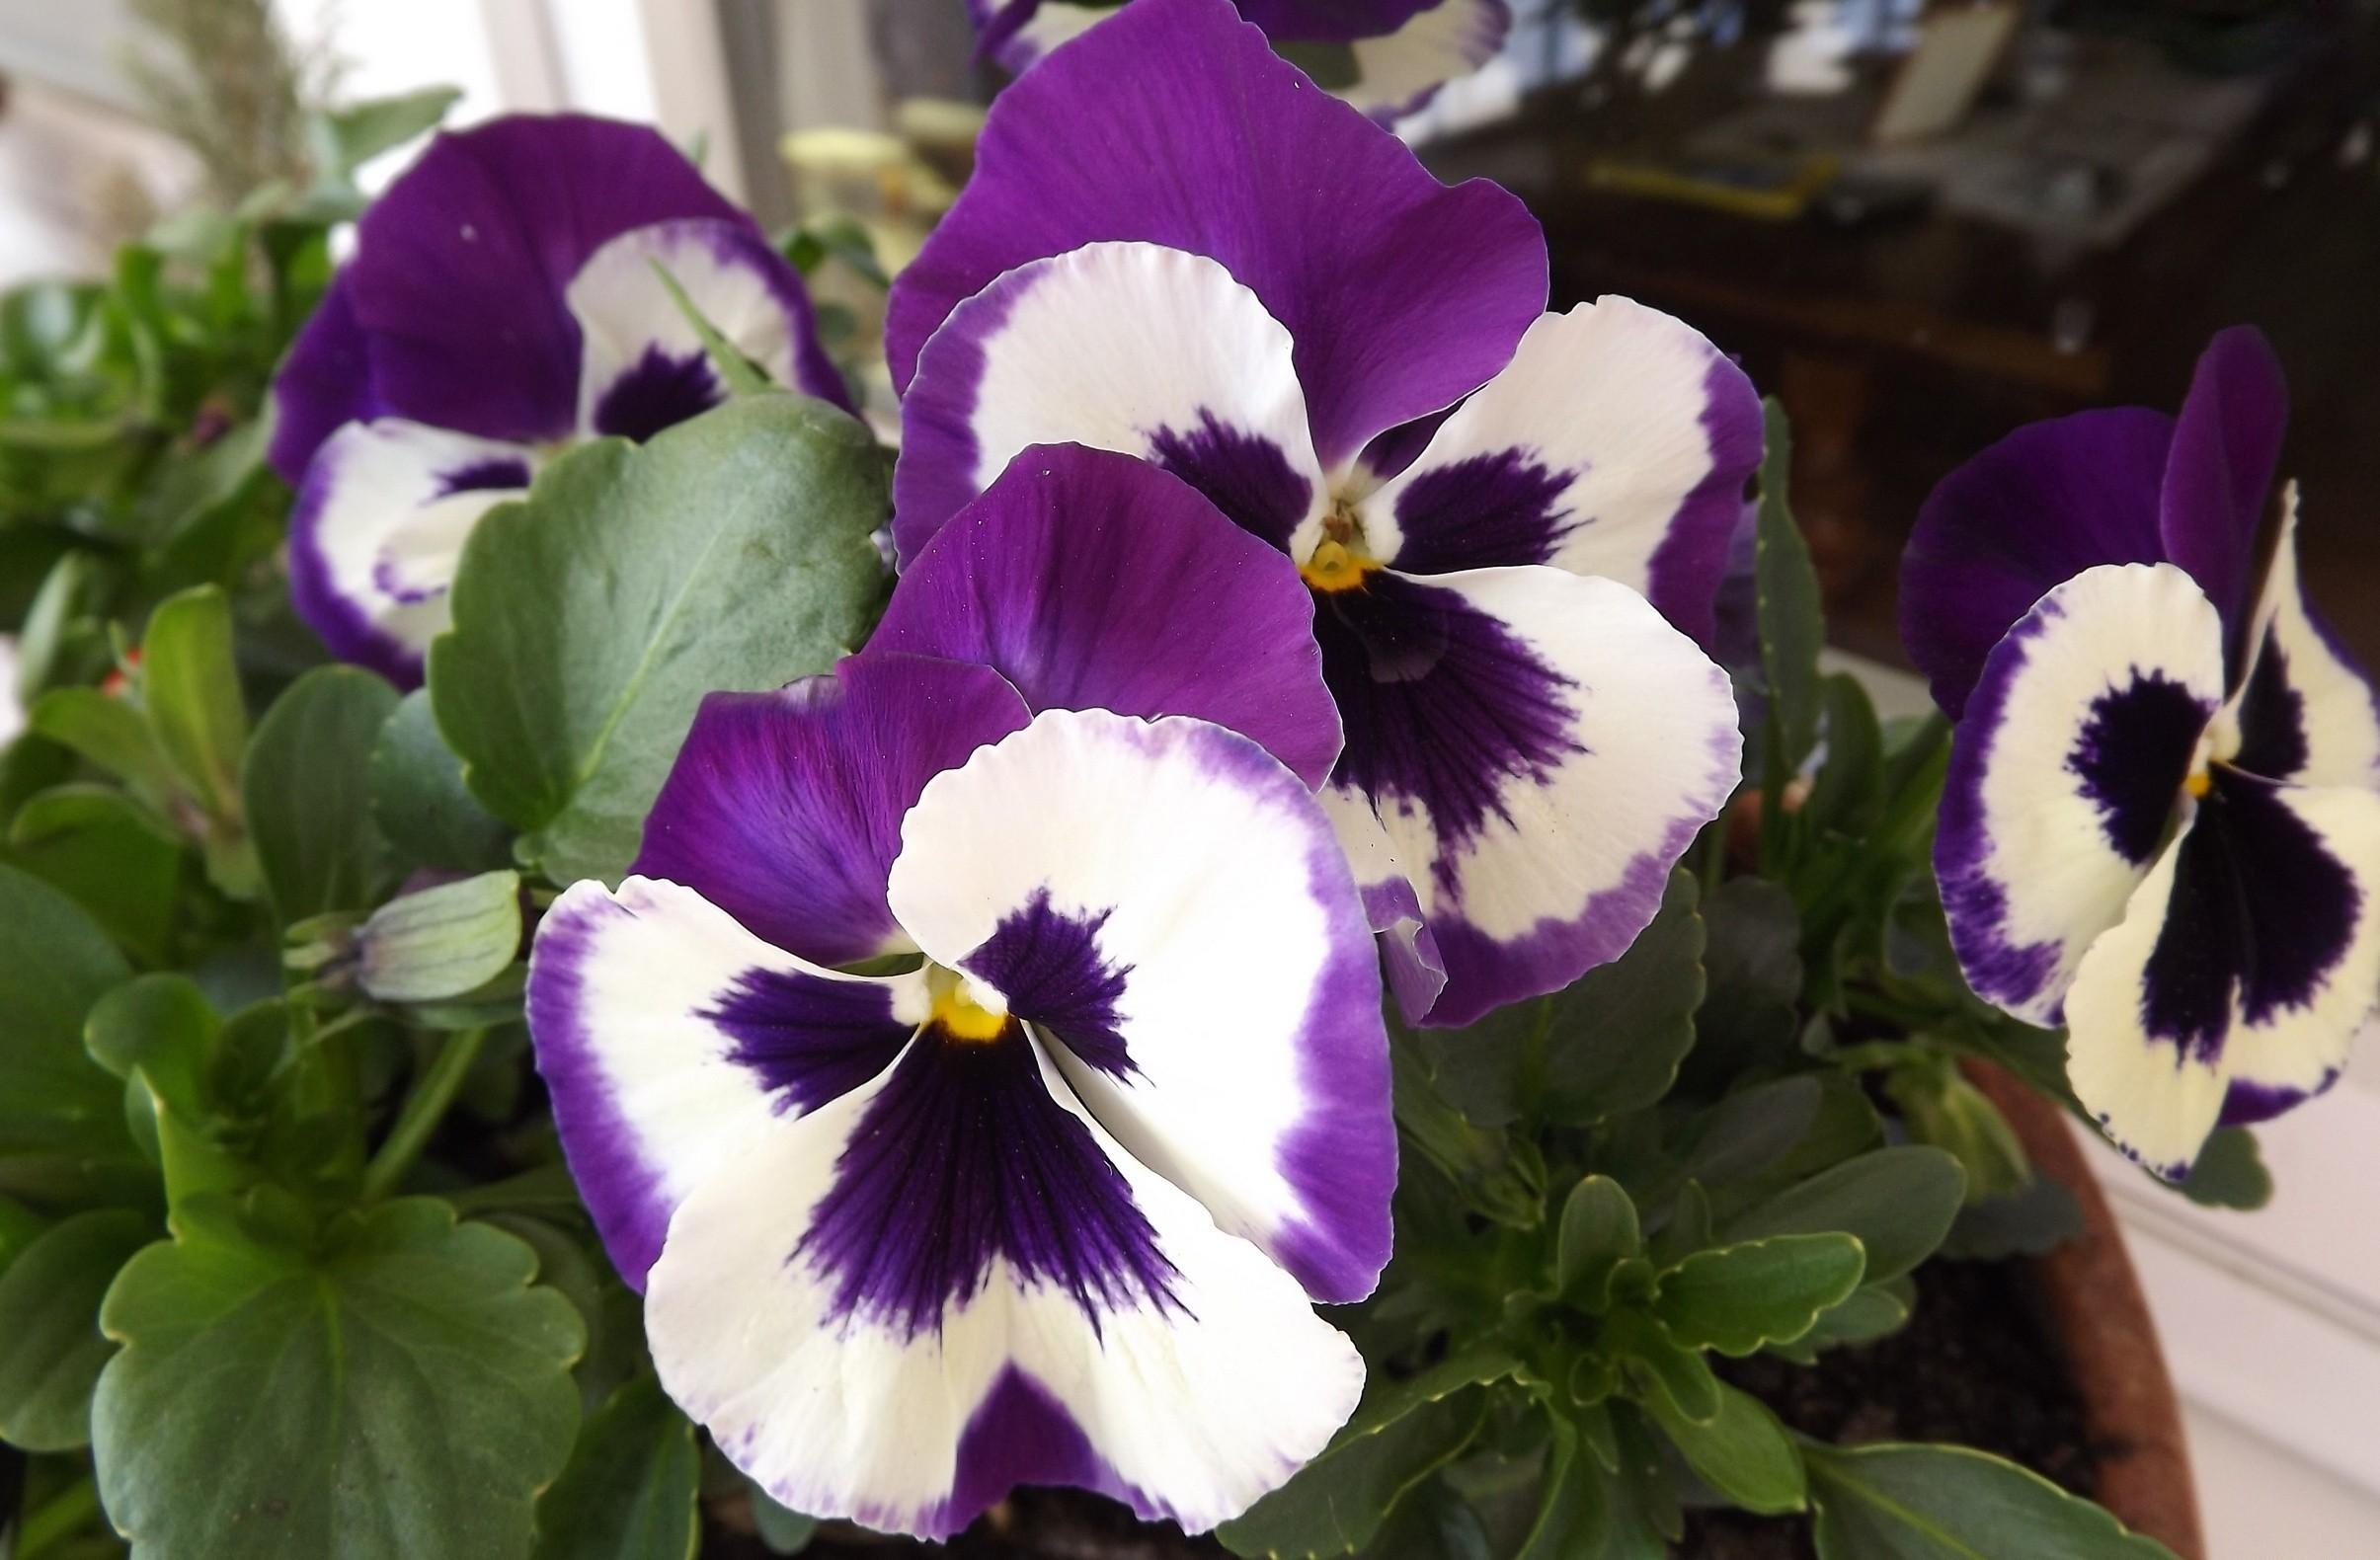 Free Images close-up, flowers, pot, flower Pansies